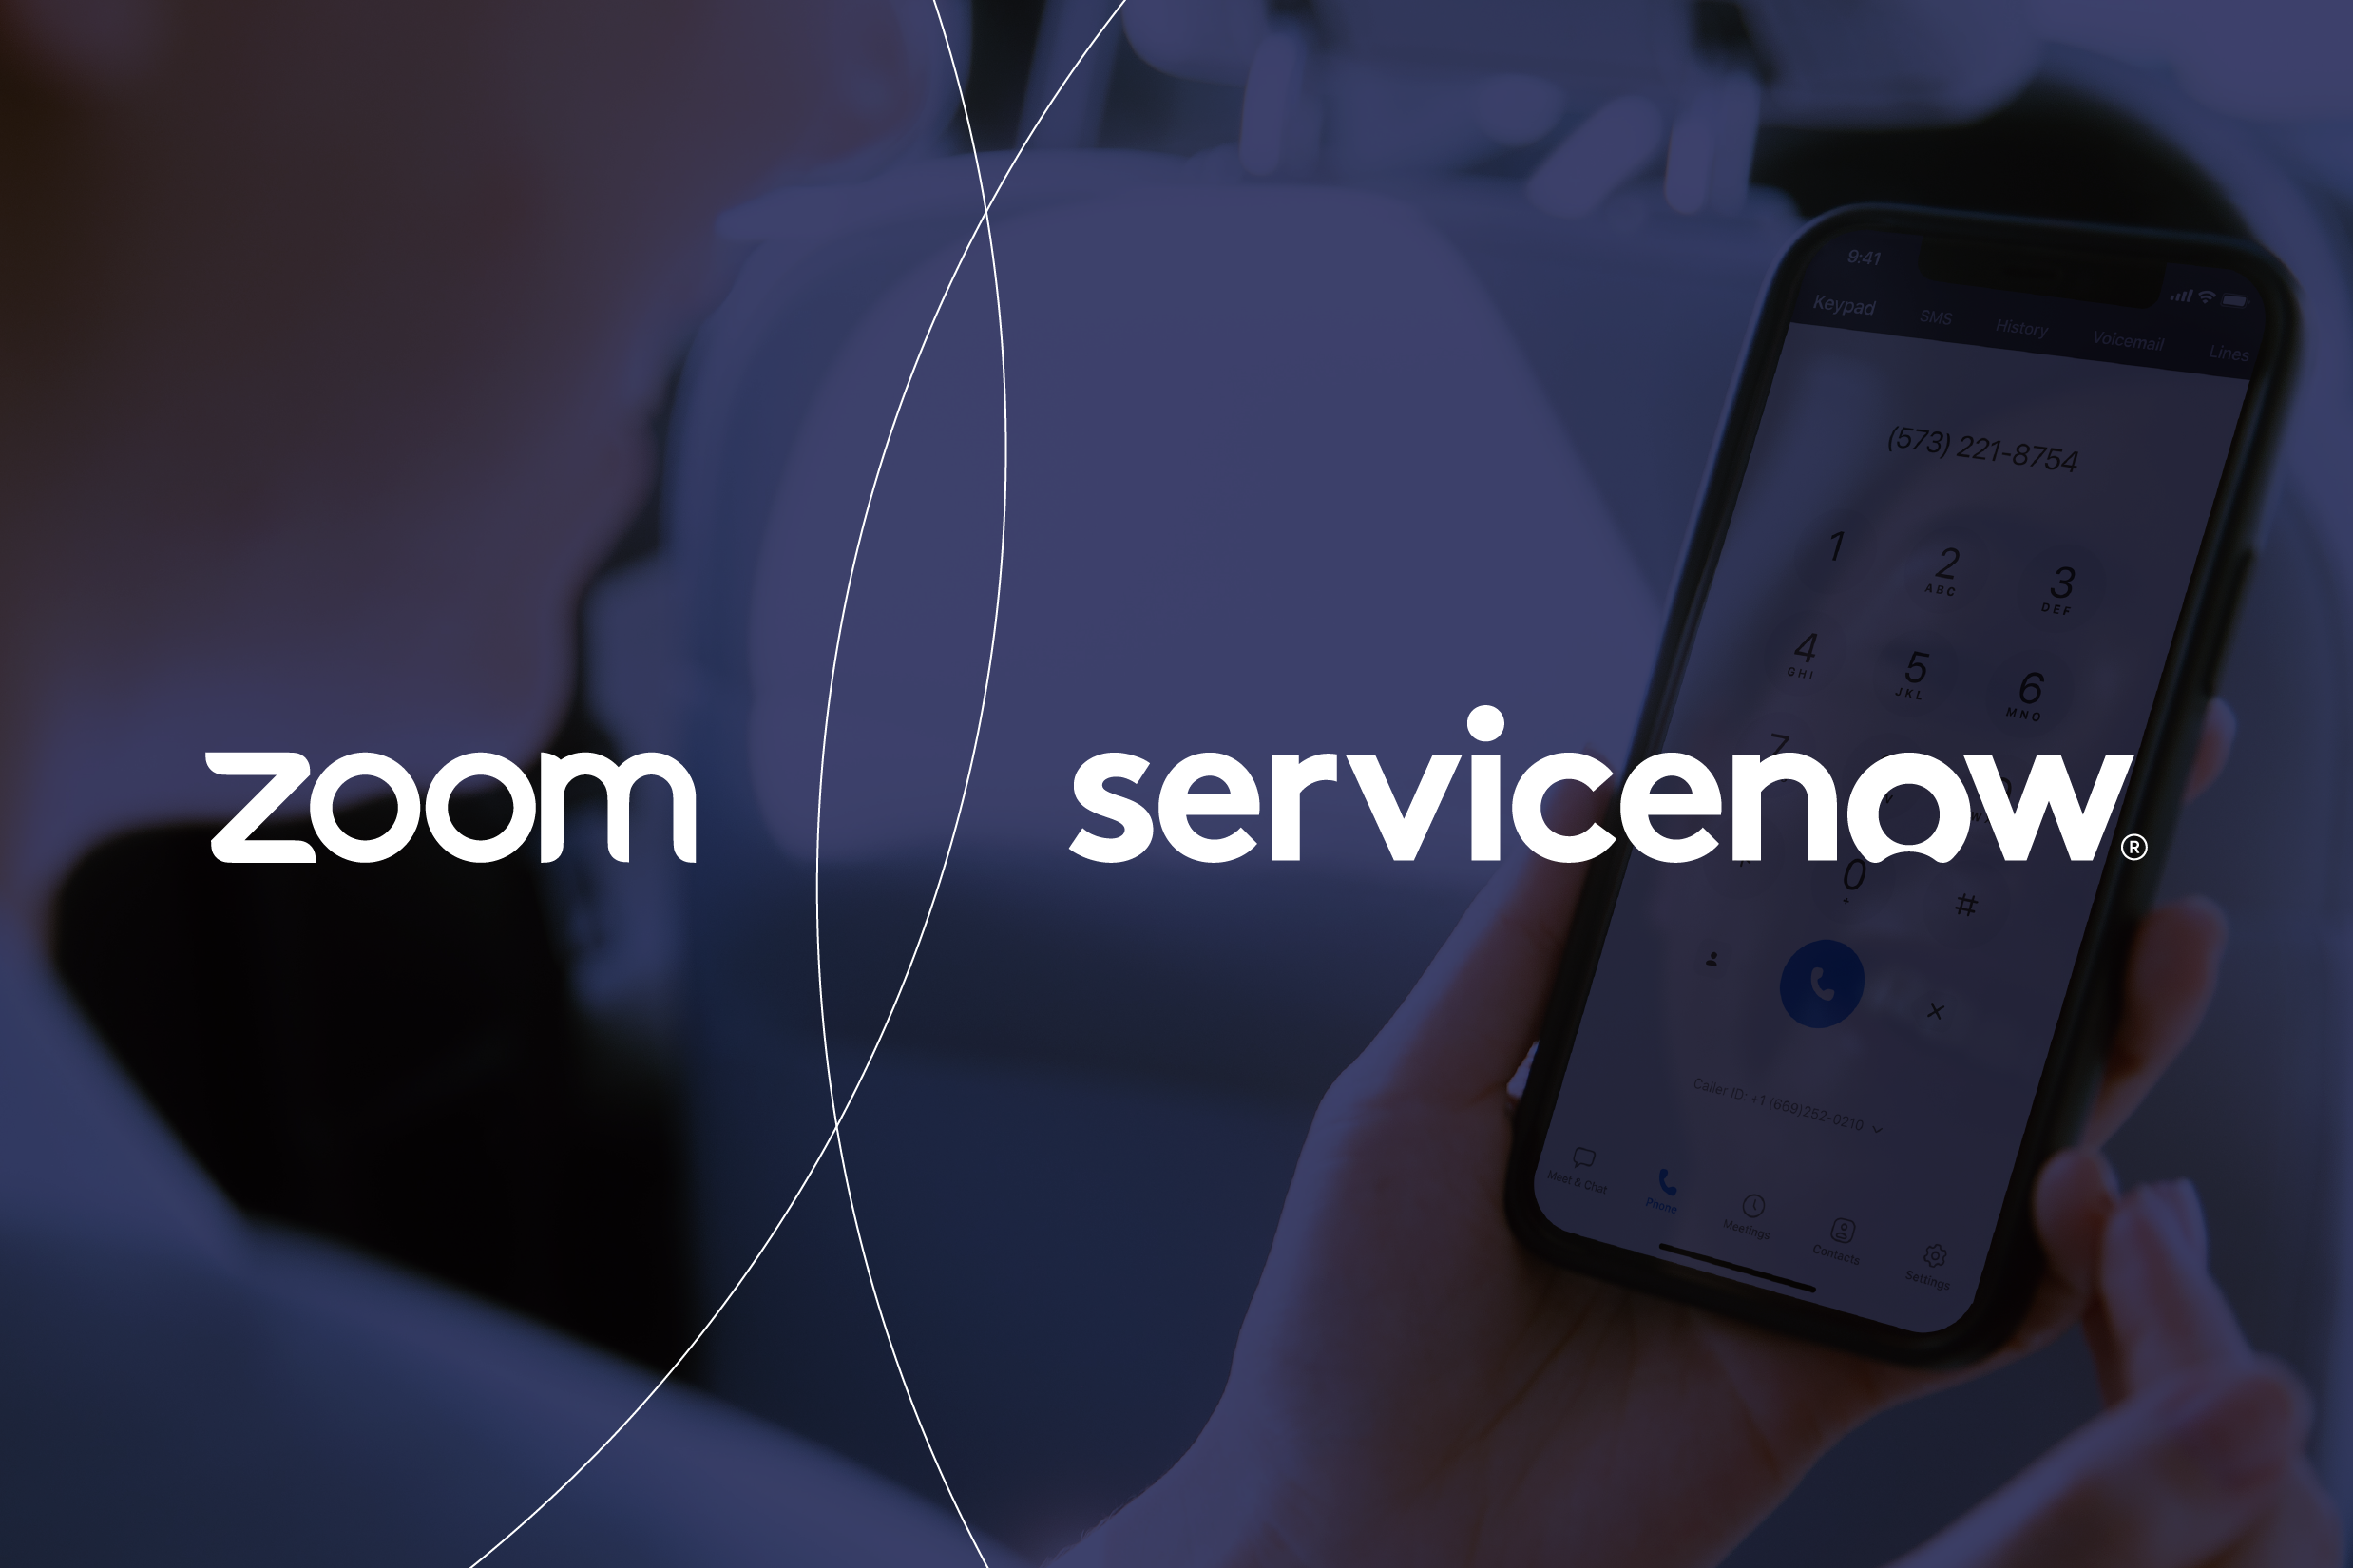 New Zoom Phone And Servicenow Integration Streamlines Support Workflows